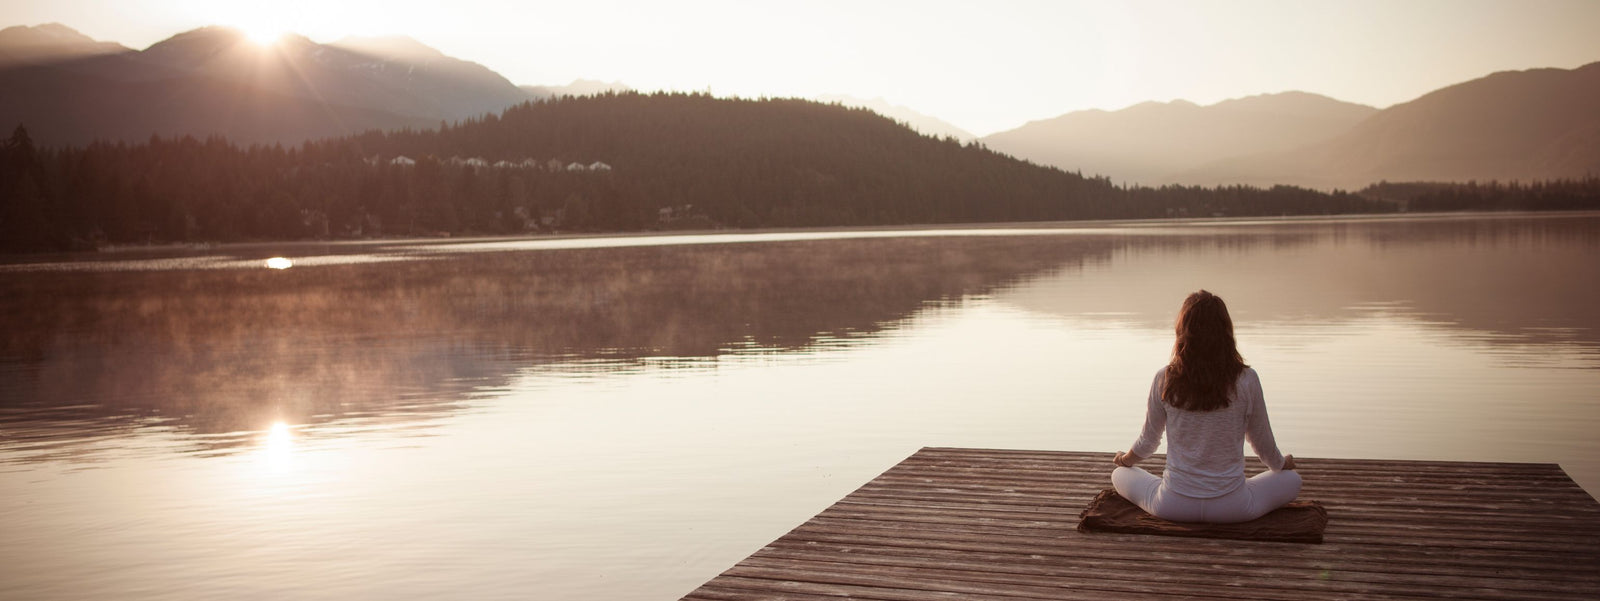 5 Mindfulness Practices for Stress Relief and Relaxation